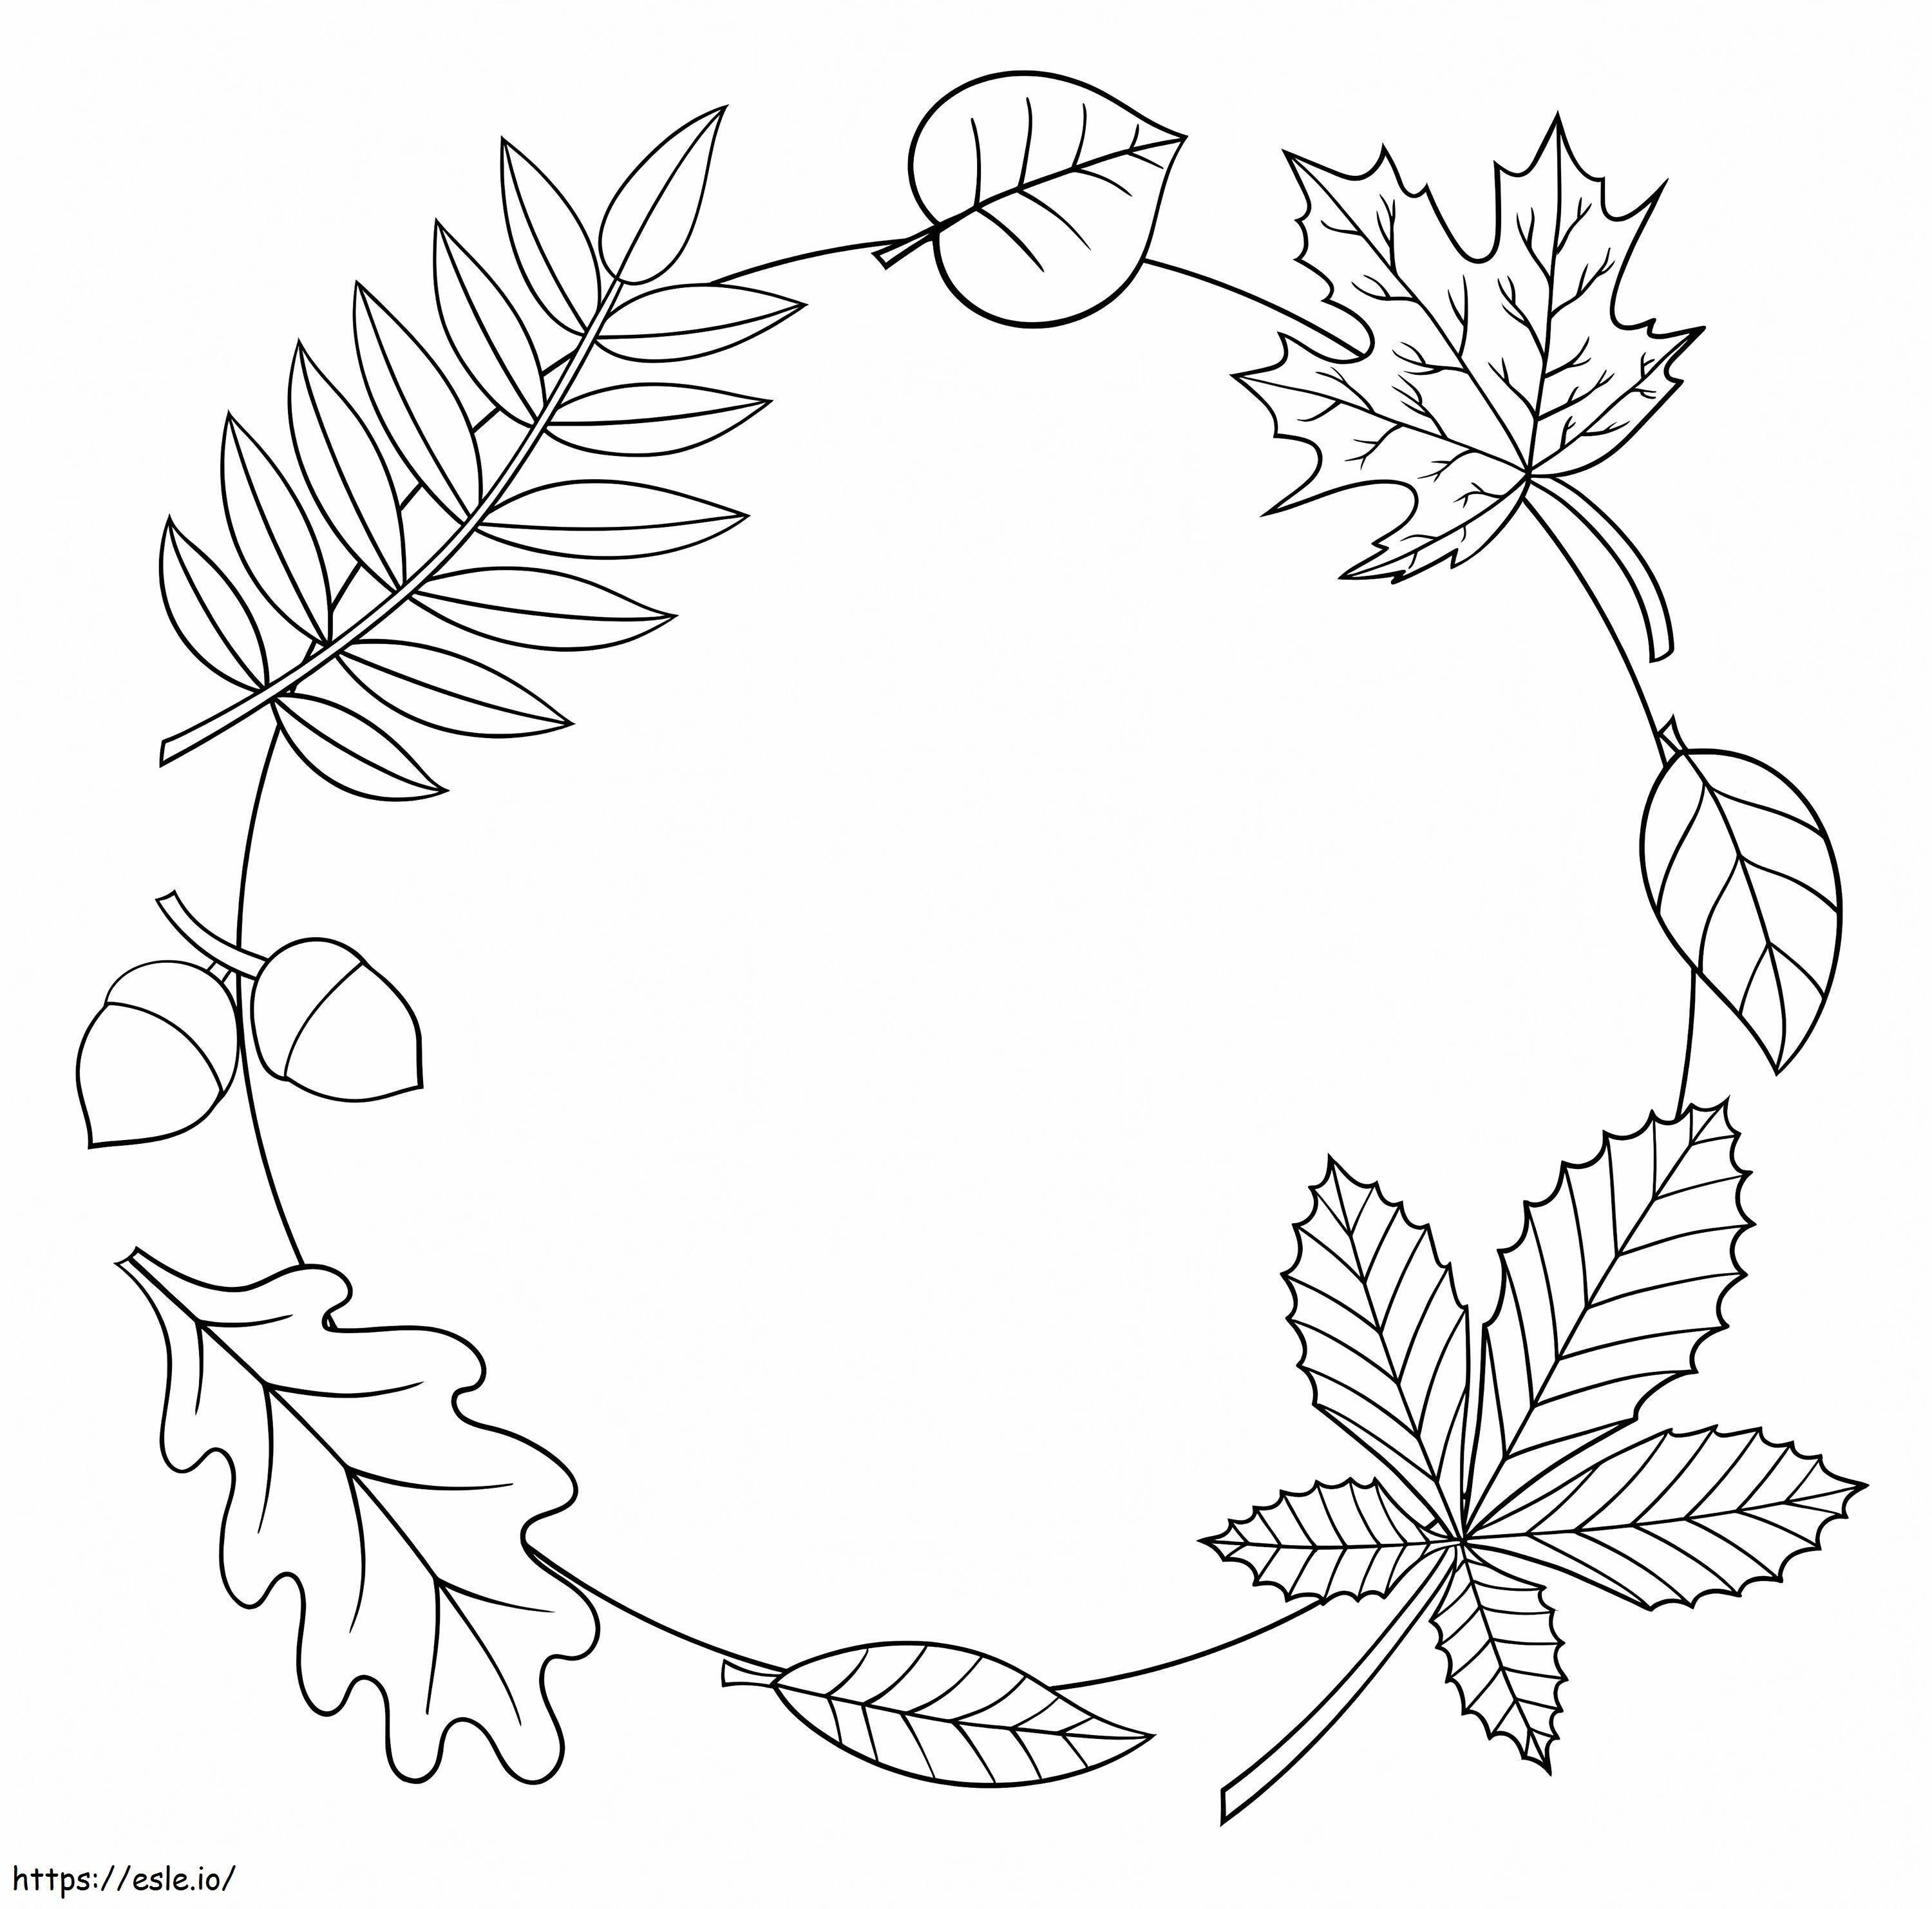 Circle Leaf coloring page